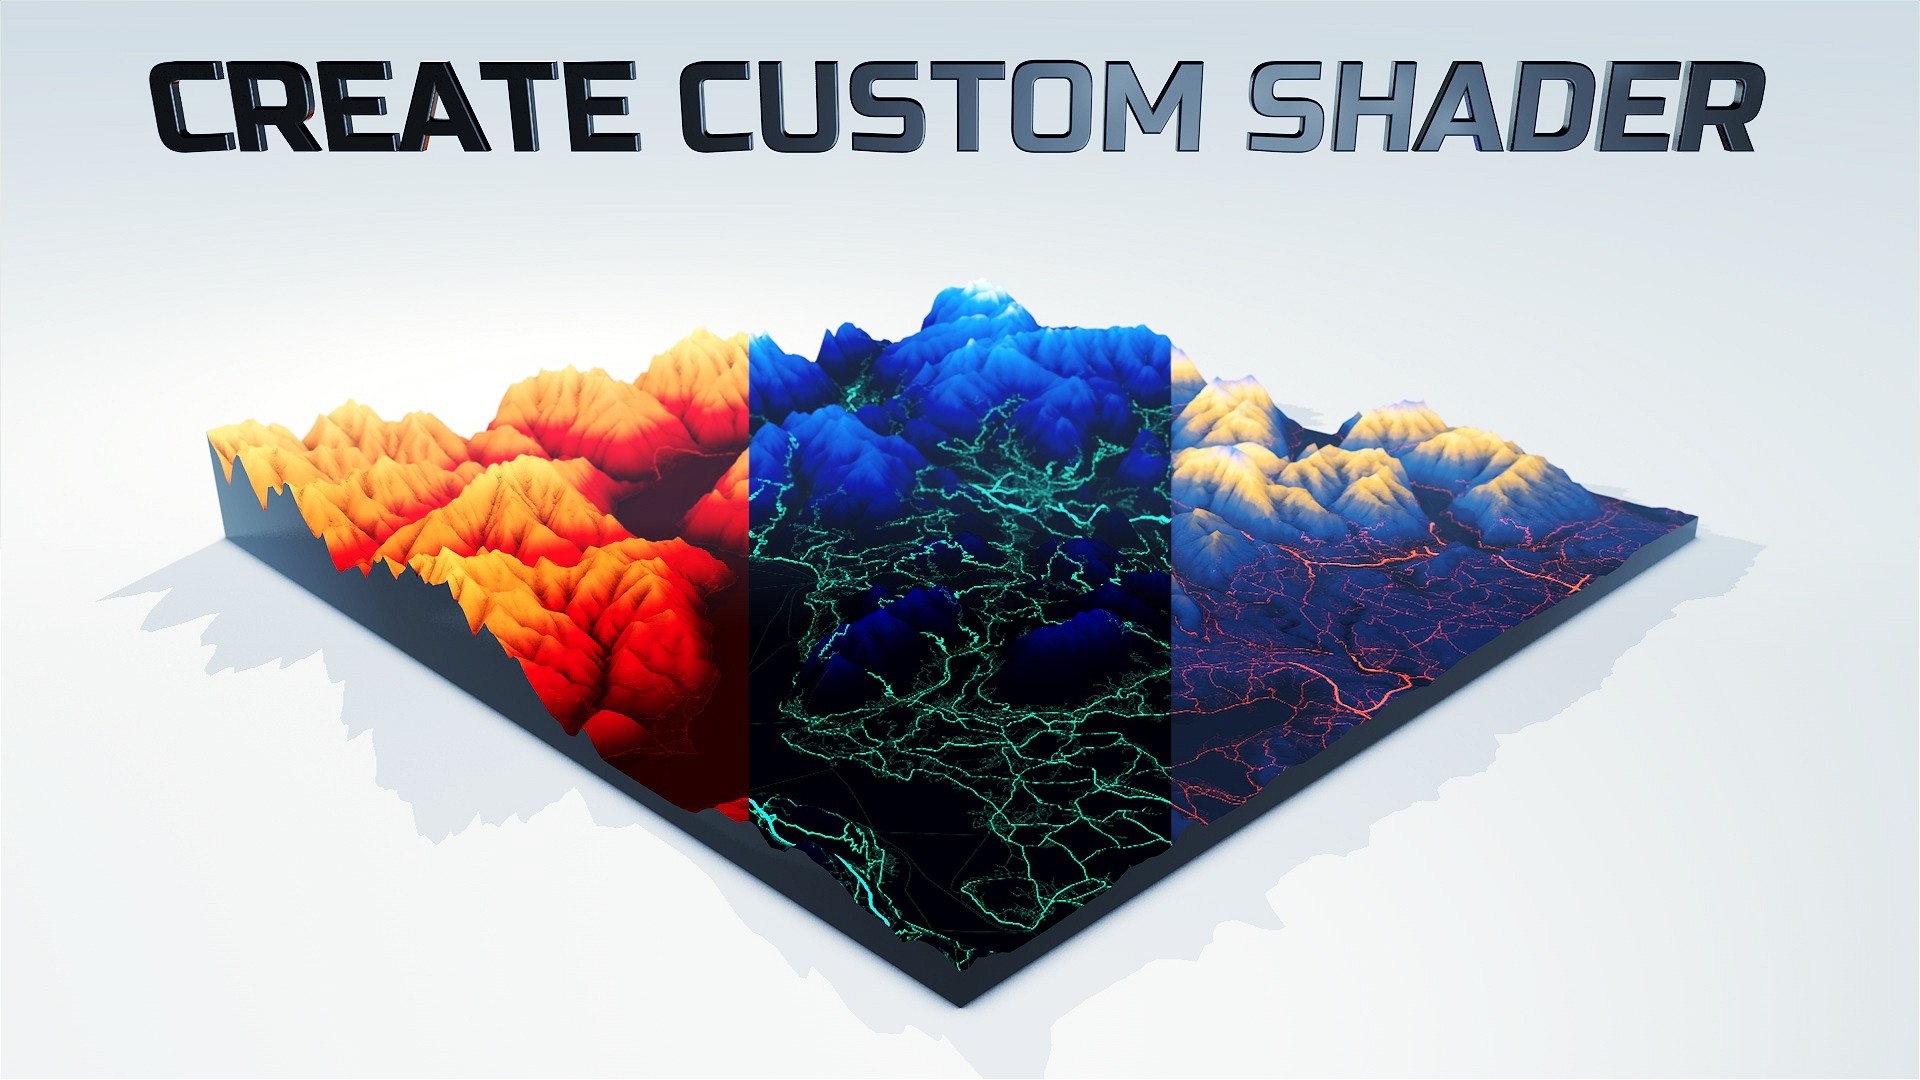 Create your own unique surface shader